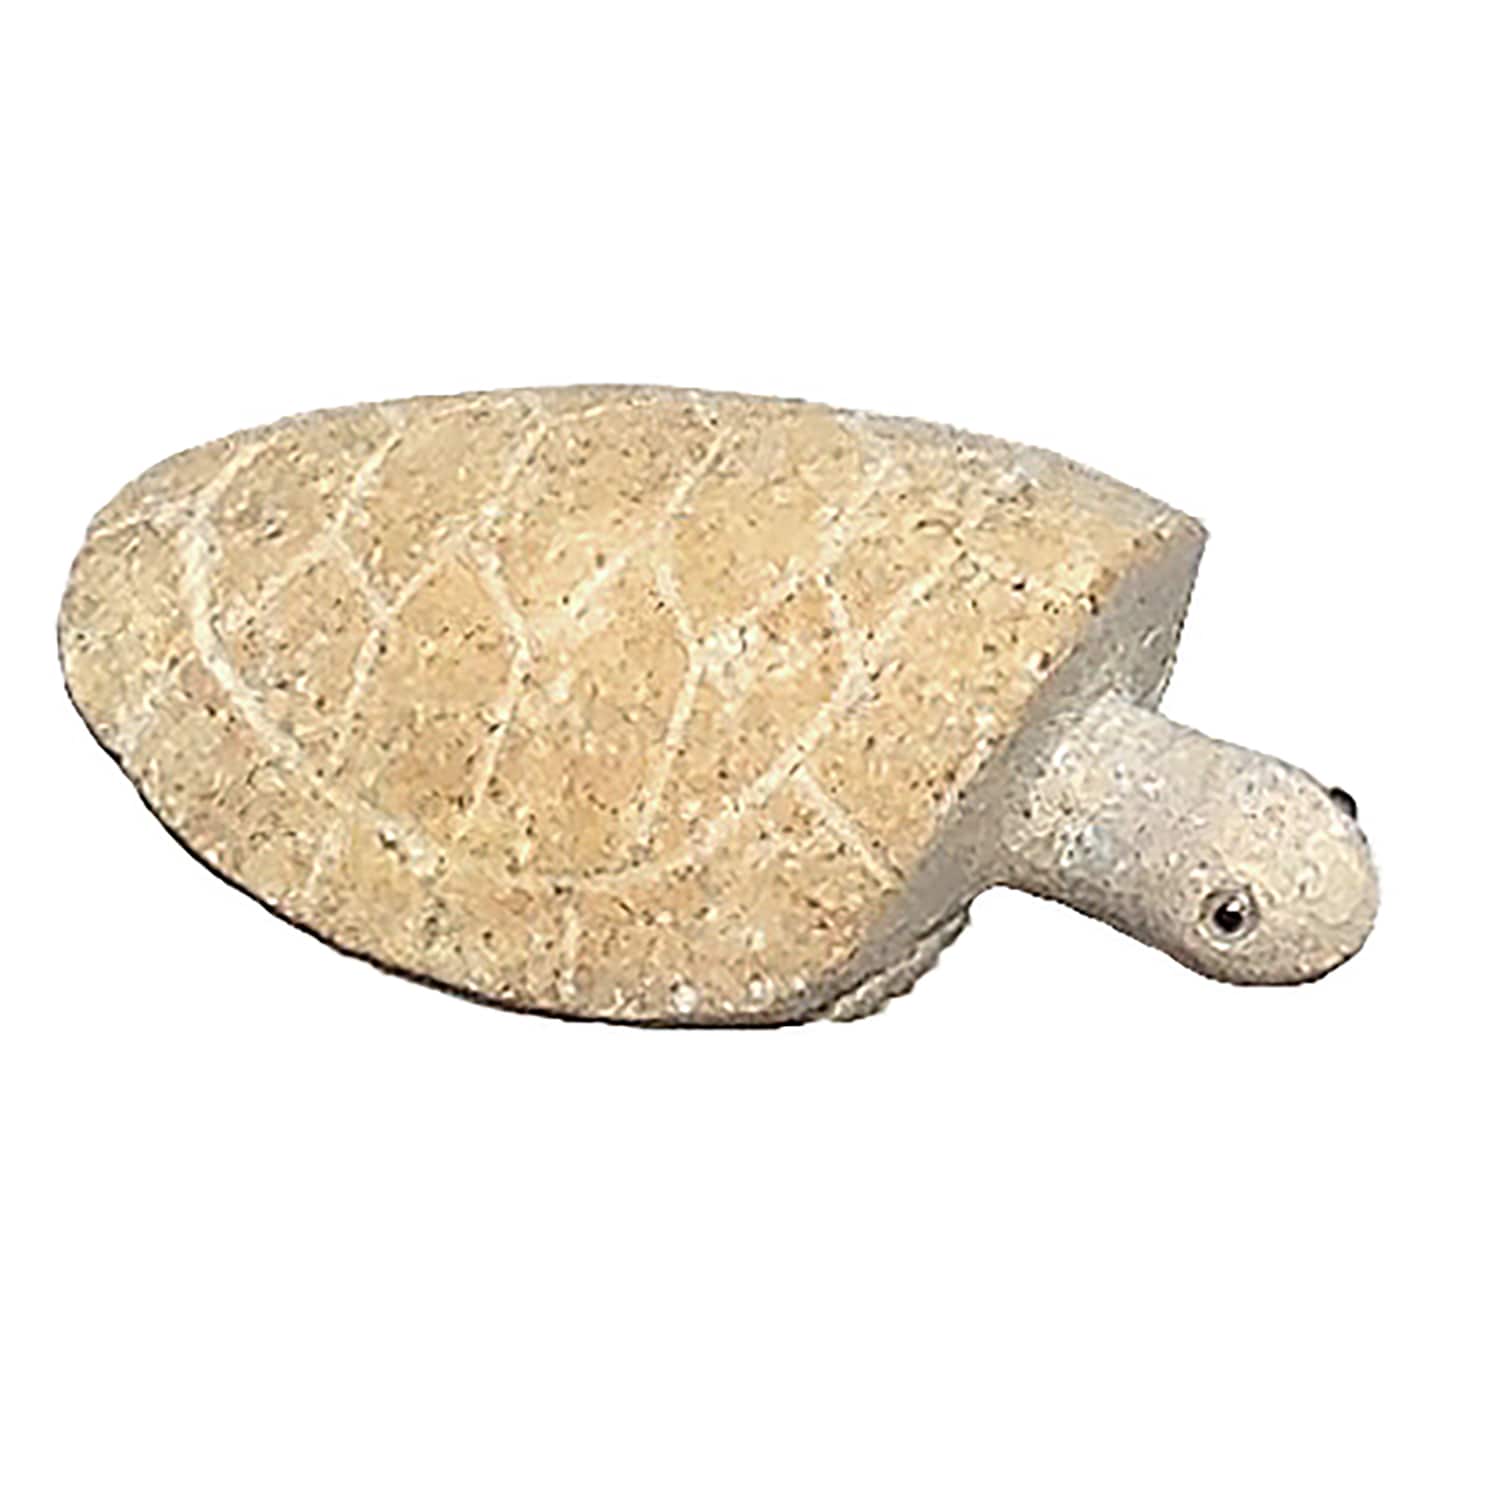 1-in H x 4-in W Multiple Colors/Finishes Turtle Garden Statue | - Stone Age Creations AN-TU-06